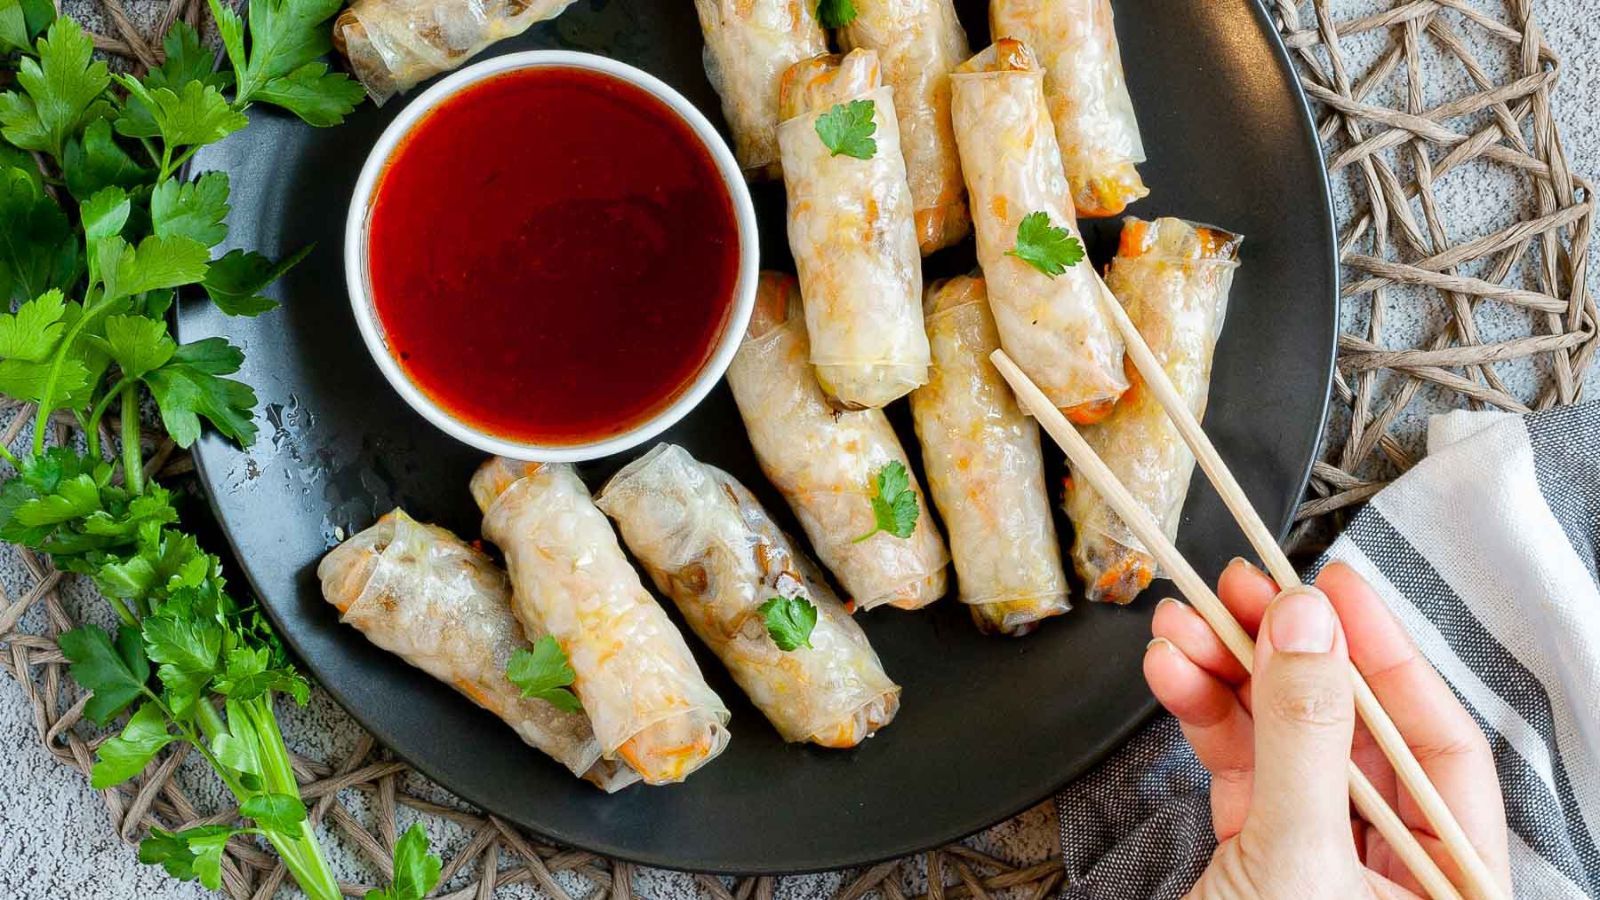 <p>These egg rolls are a perfect appetizer or snack, with a savory and crispy texture that will satisfy your cravings. Made with a flavorful mix of vegetables, they are a healthier alternative to traditional egg rolls and can be easily baked, fried or air-fried in just a few minutes.</p><p><strong>Recipe: <a href="https://mypureplants.com/vegan-egg-rolls-rice-paper/">egg rolls</a></strong></p>